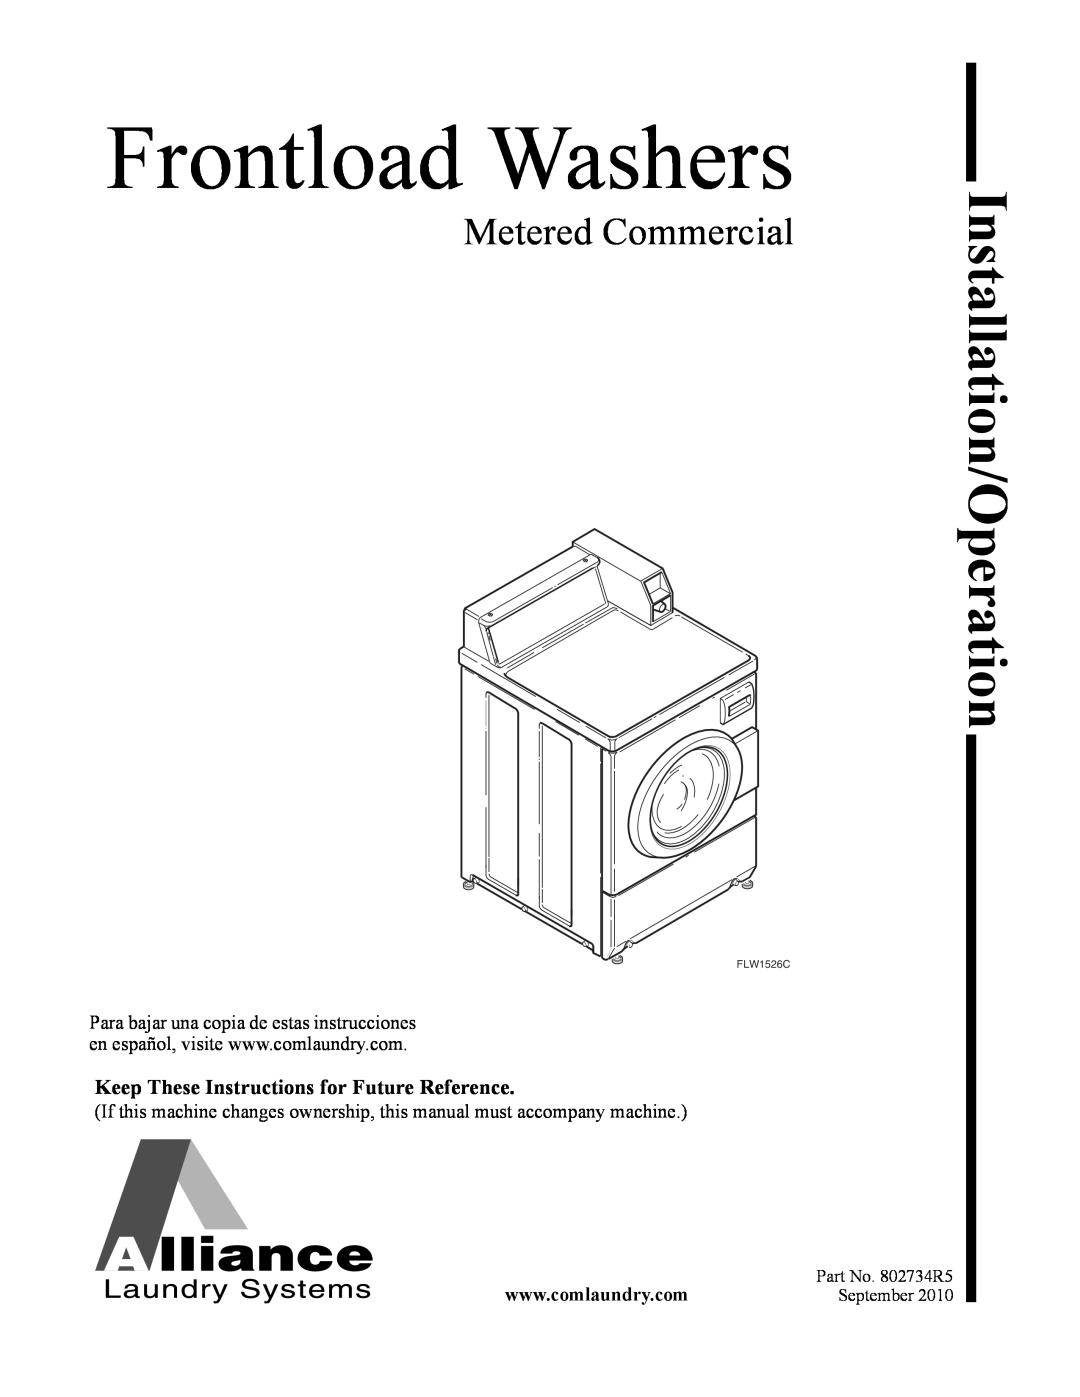 Alliance Laundry Systems FLW1526C manual Frontload Washers, Metered Commercial, Installation/Operation 